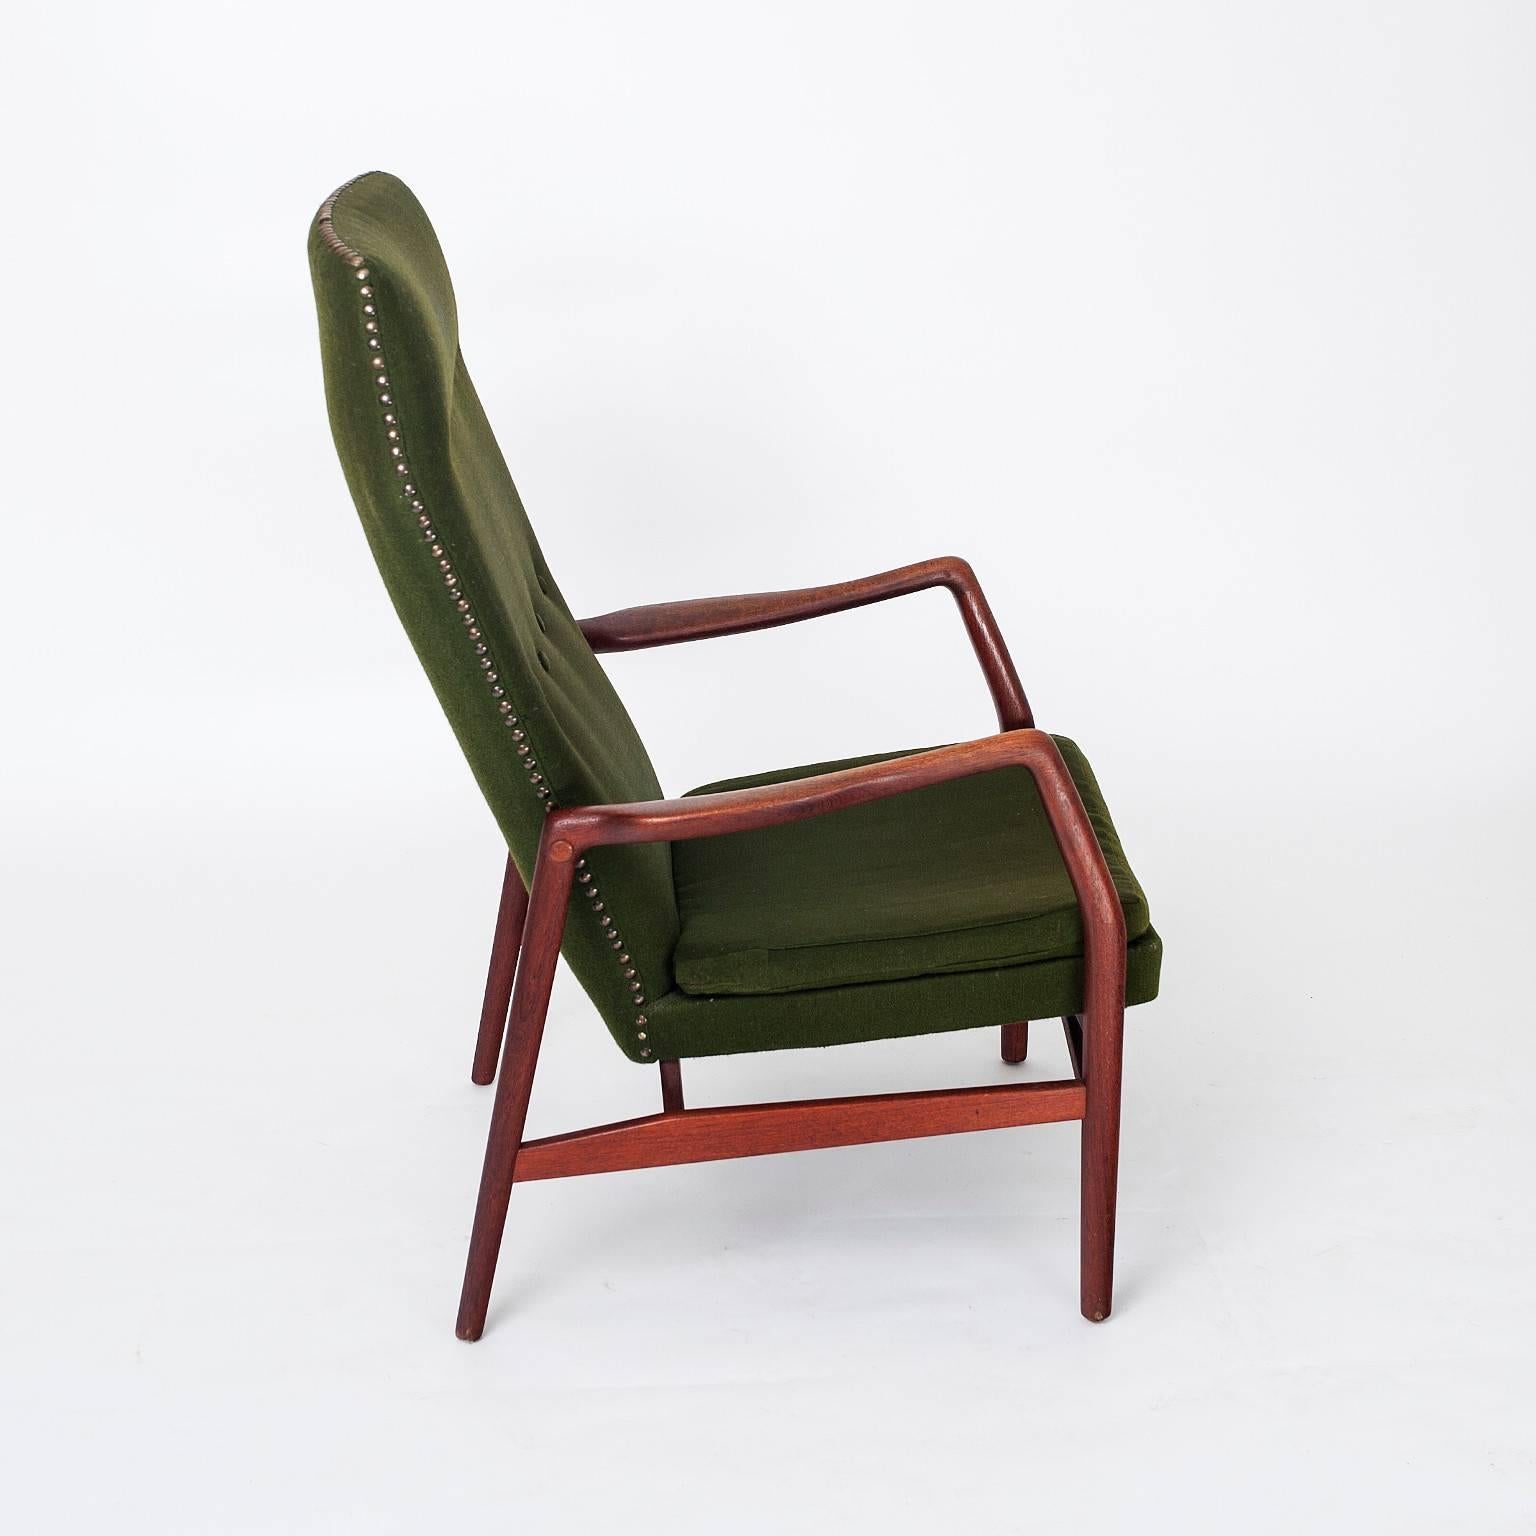 This is an original Kurt Olsen Model 215b high back lounge chair produced by Slagelse Møbelværk, Denmark. Designed in 1954 the Model 215b is made from a solid teak frame and upholstered green wool. It also features brass pins across the top edge in